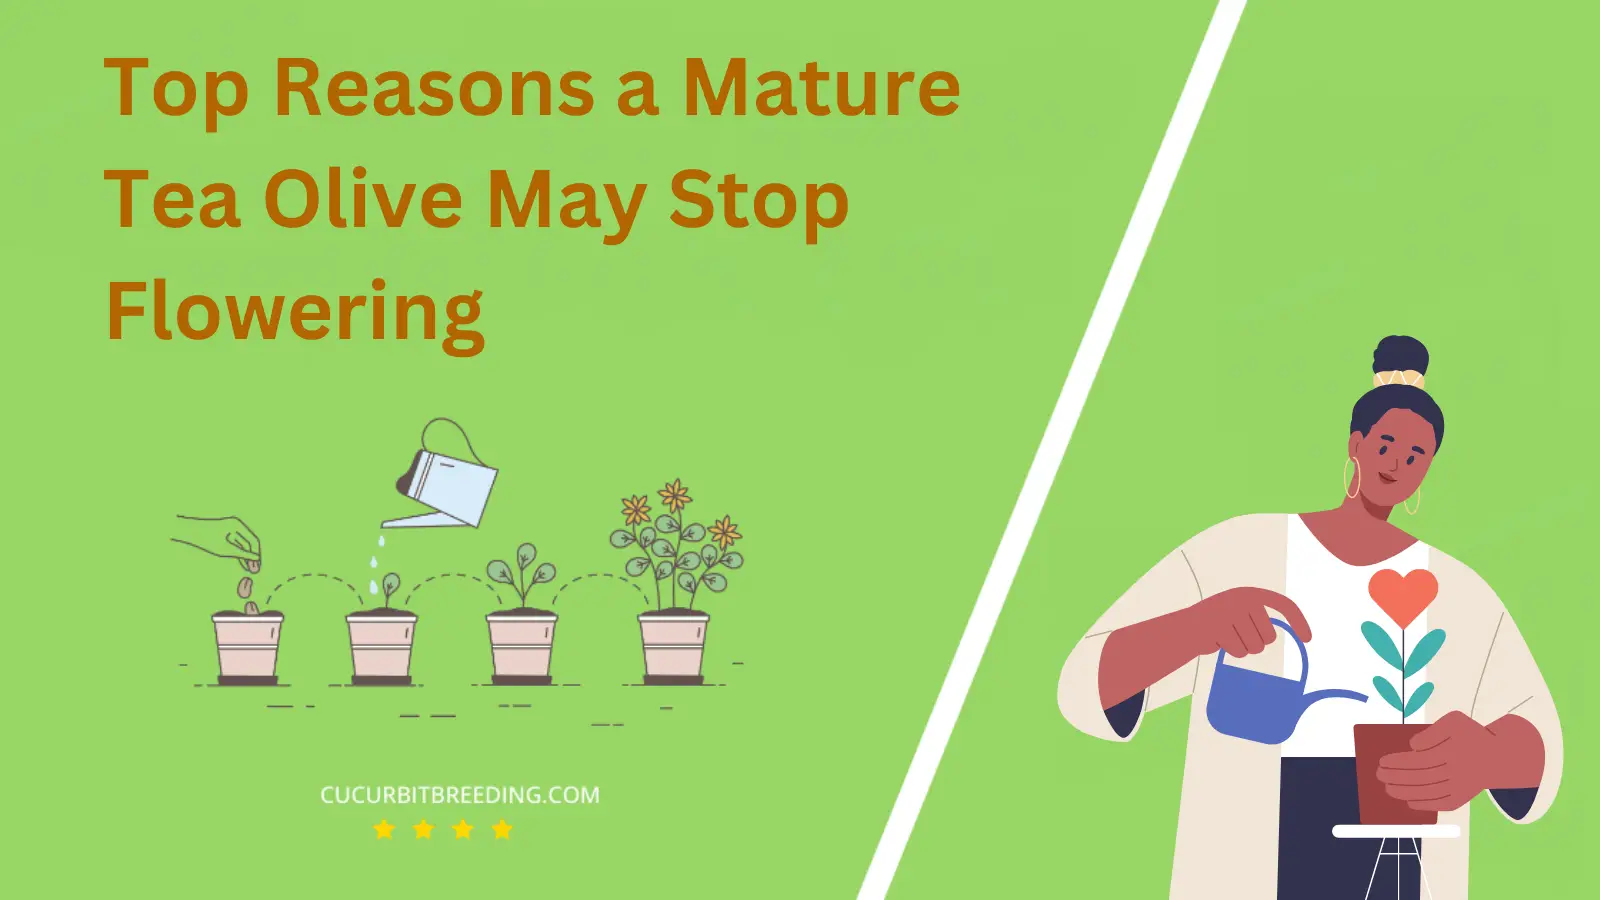 Top Reasons a Mature Tea Olive May Stop Flowering